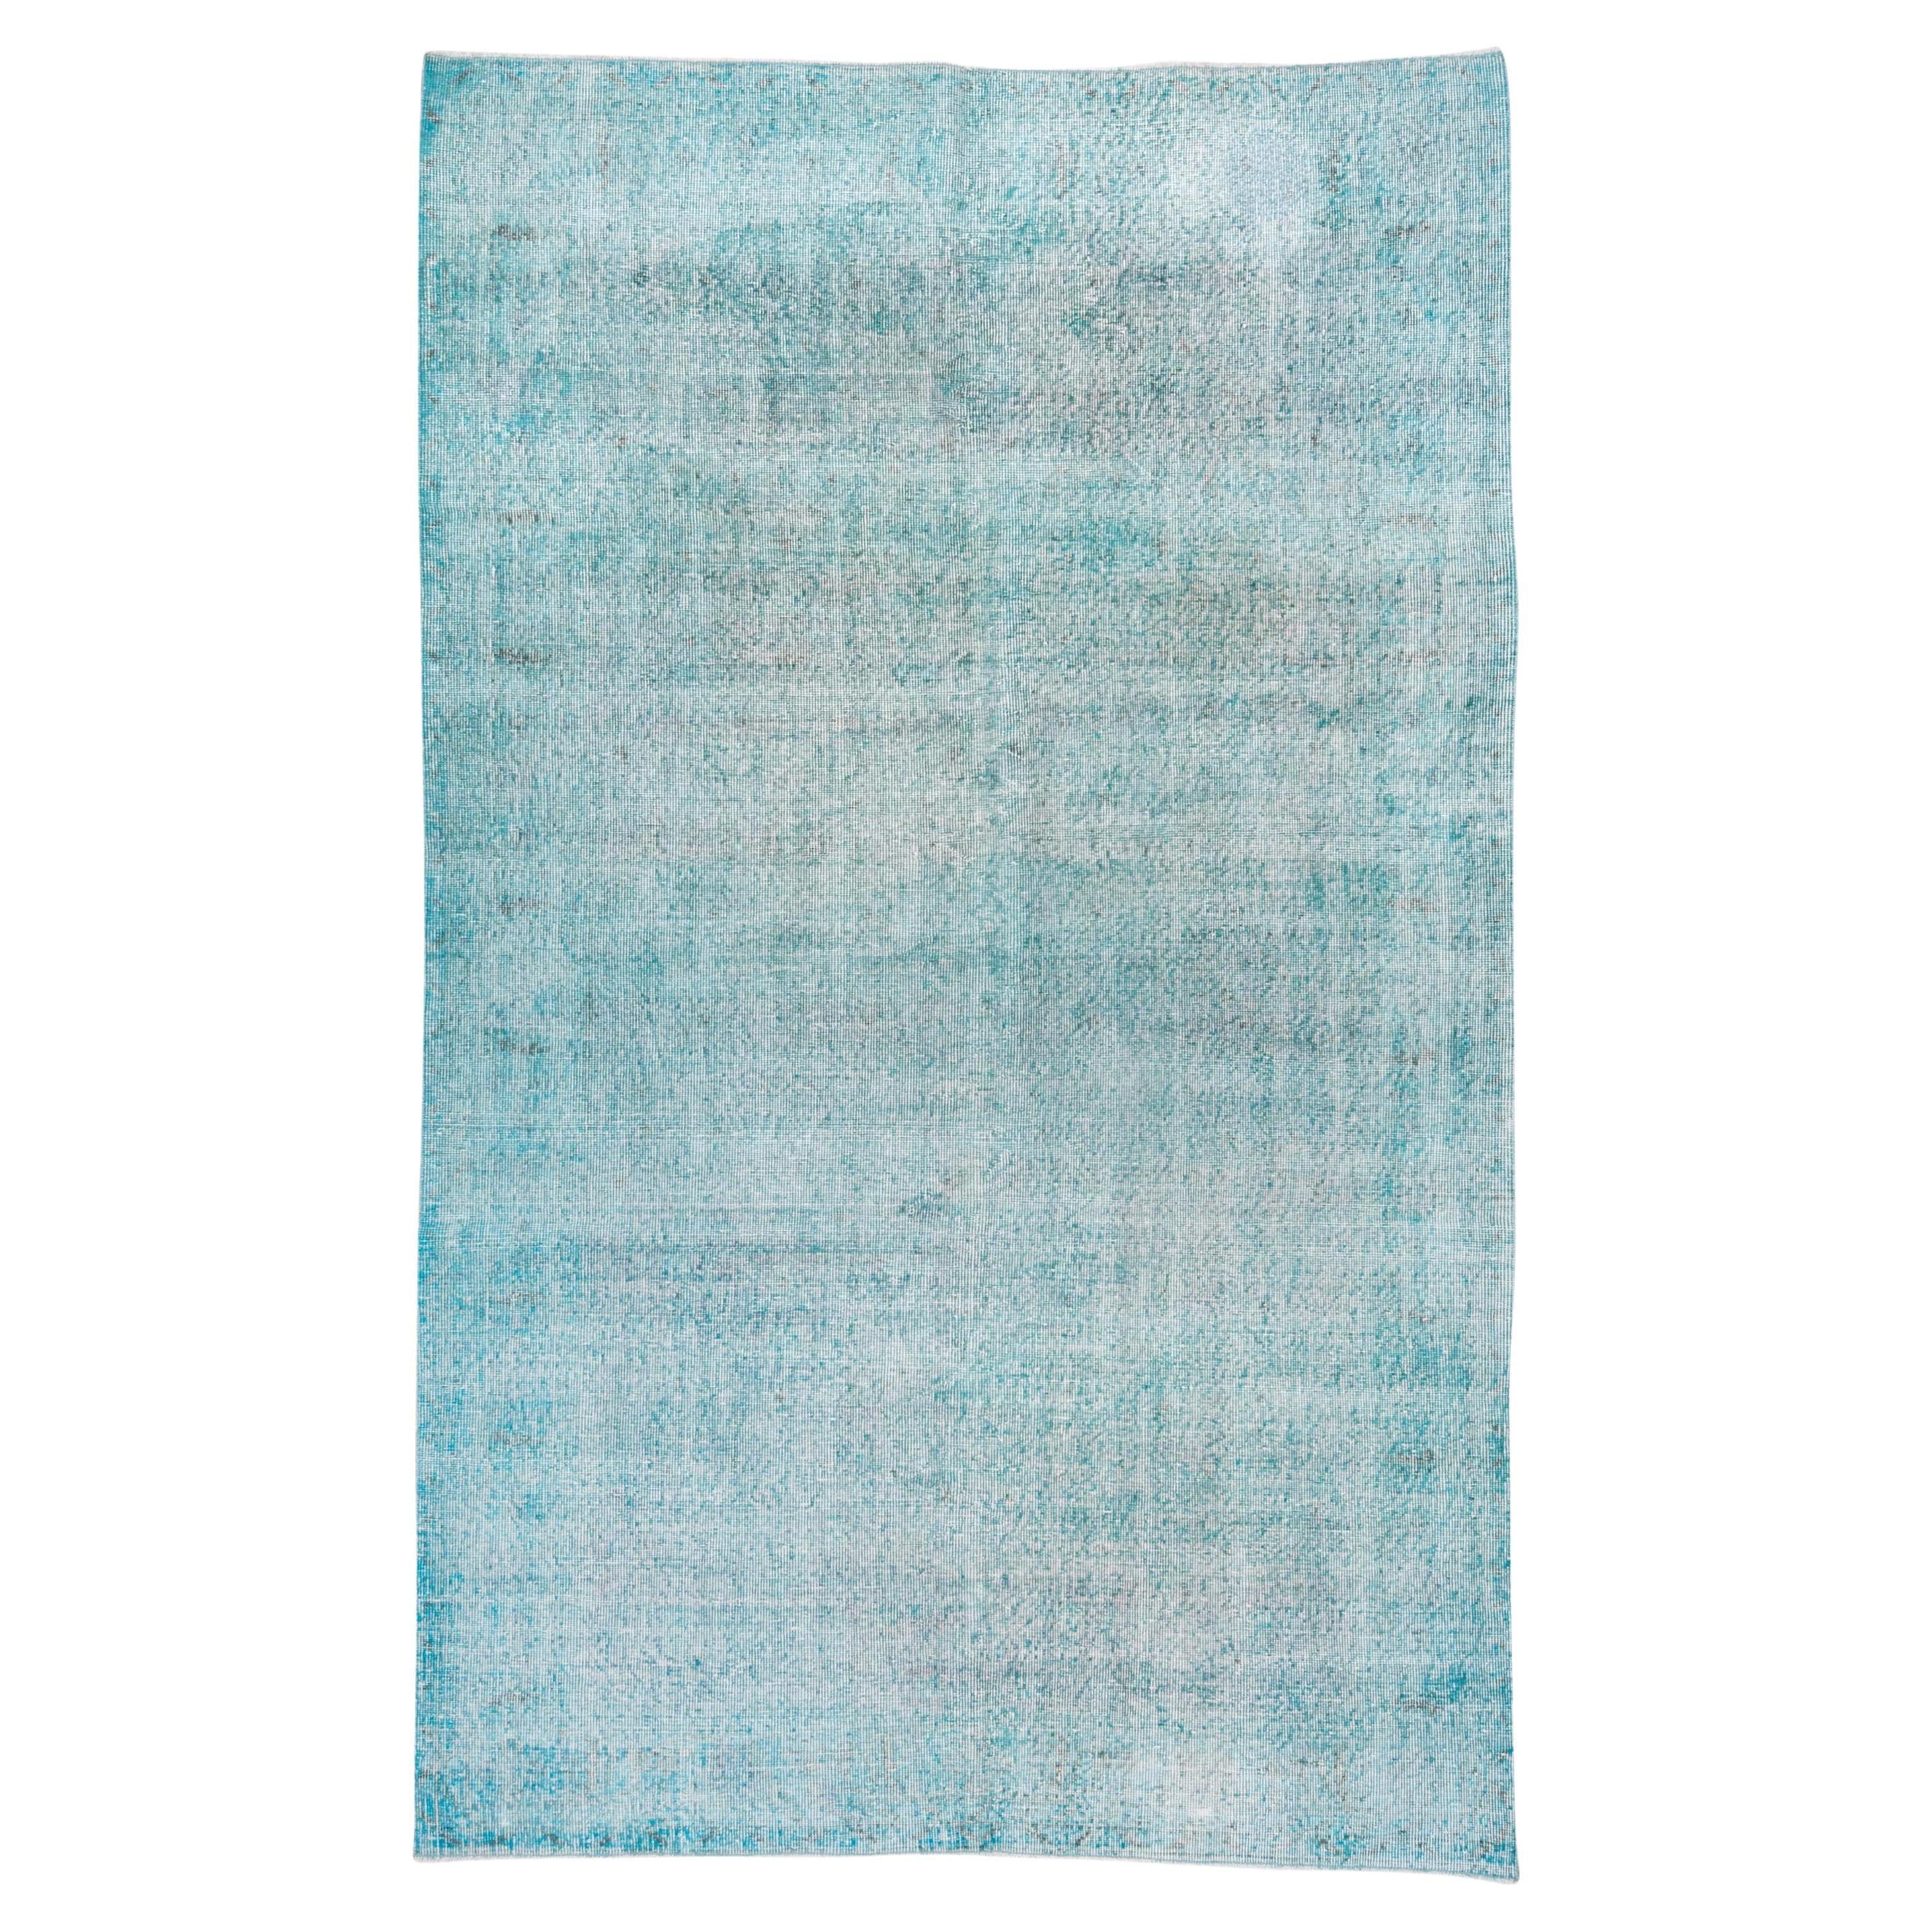 Vintage Bright Turquoise Overdyed Wool Rug, Shabby Chic